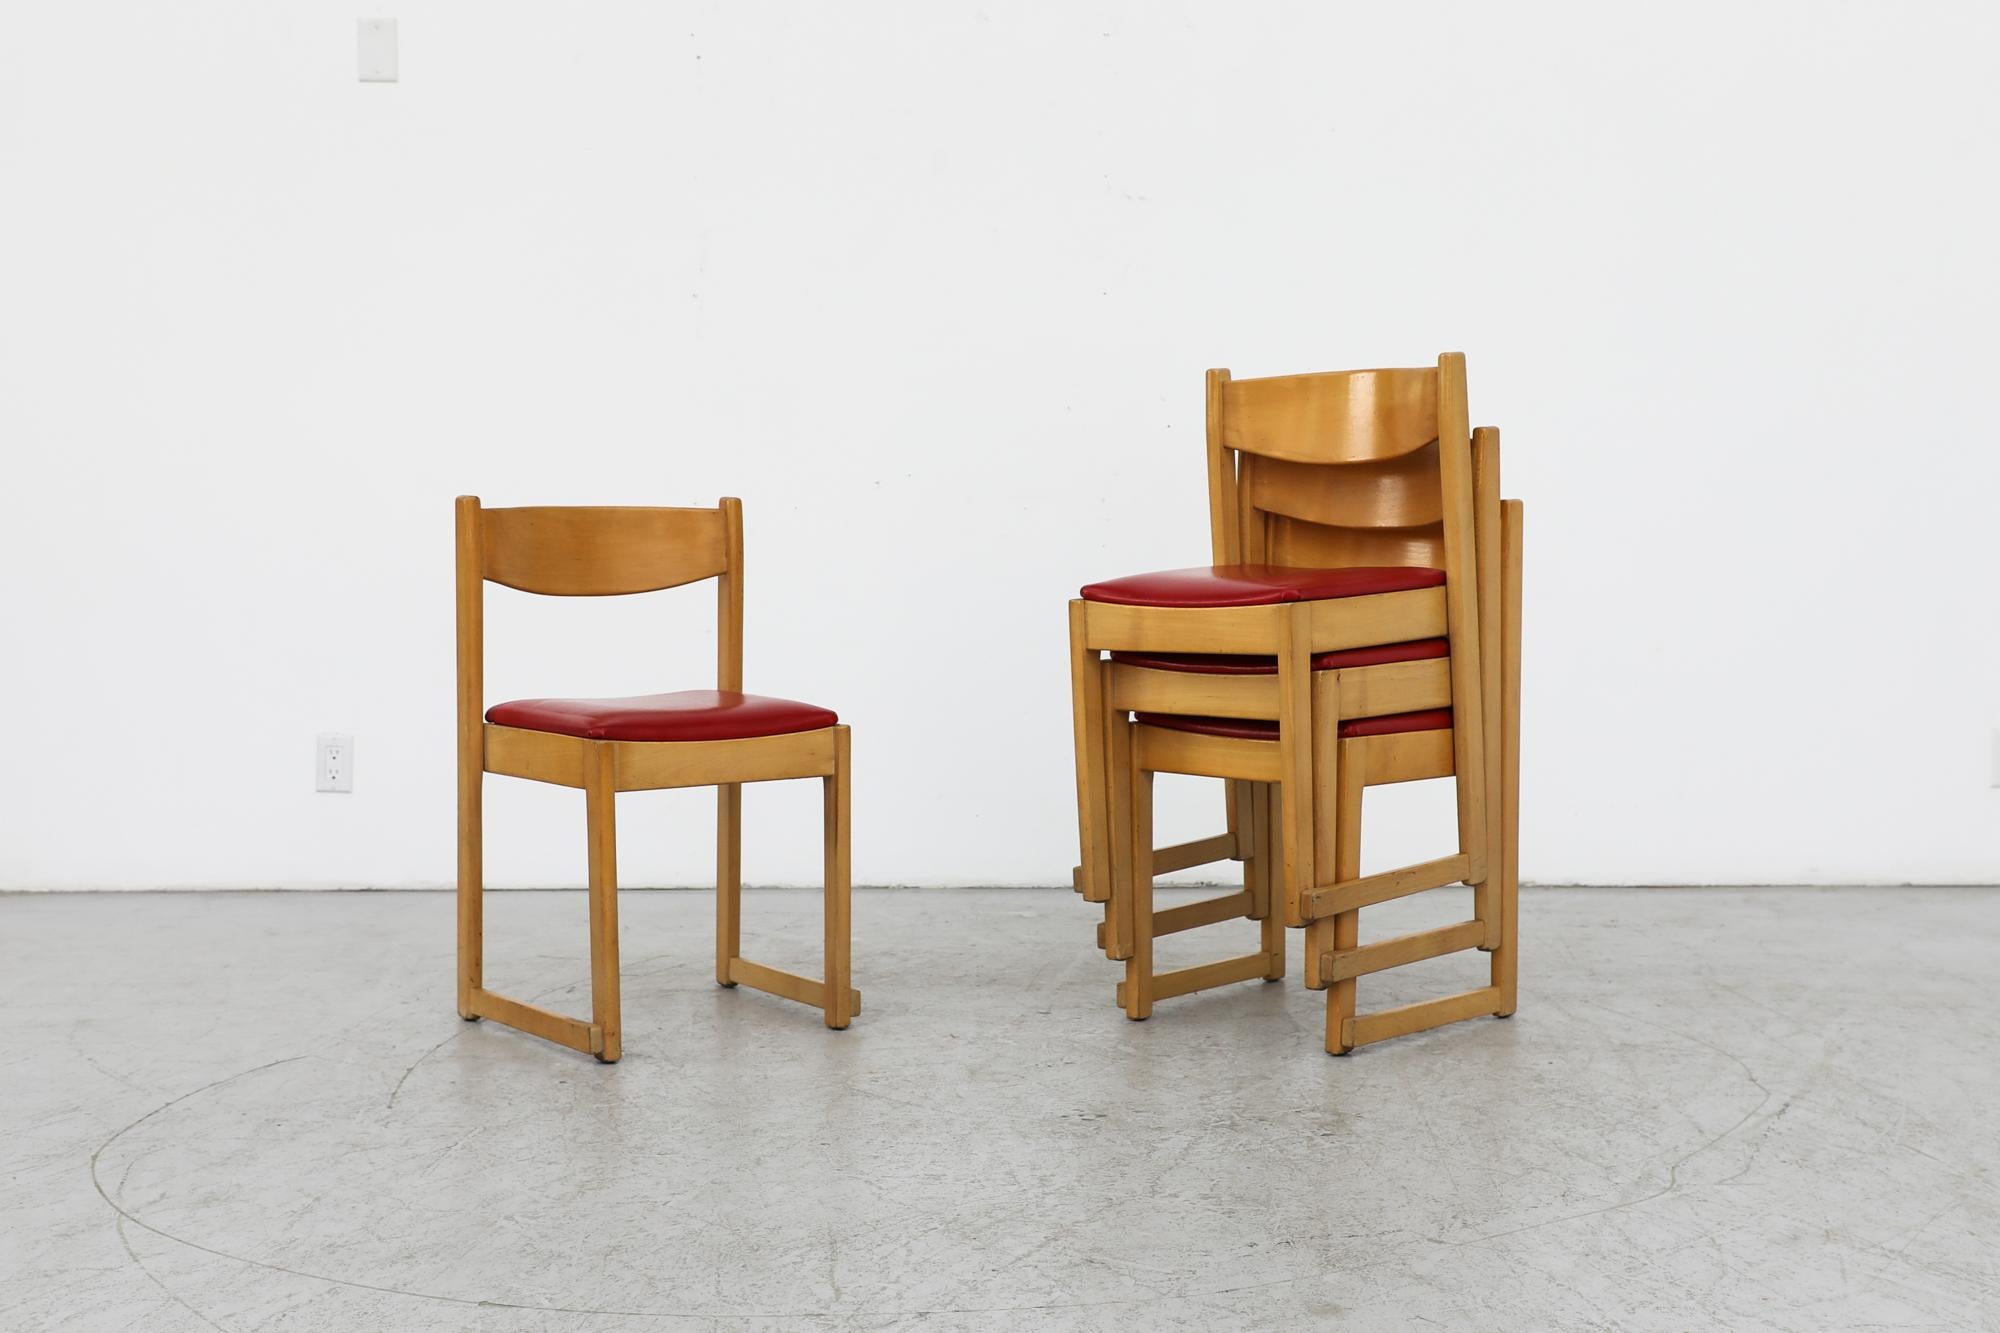 Mid century set of 4 Sven Markelius style stacking dining chairs with blonde oak frames and upholstered red skai seats. The design echoes the 'Orchestra' chairs as designed by Sven Markelius for the Helsingborg theater in the 1930s. In original